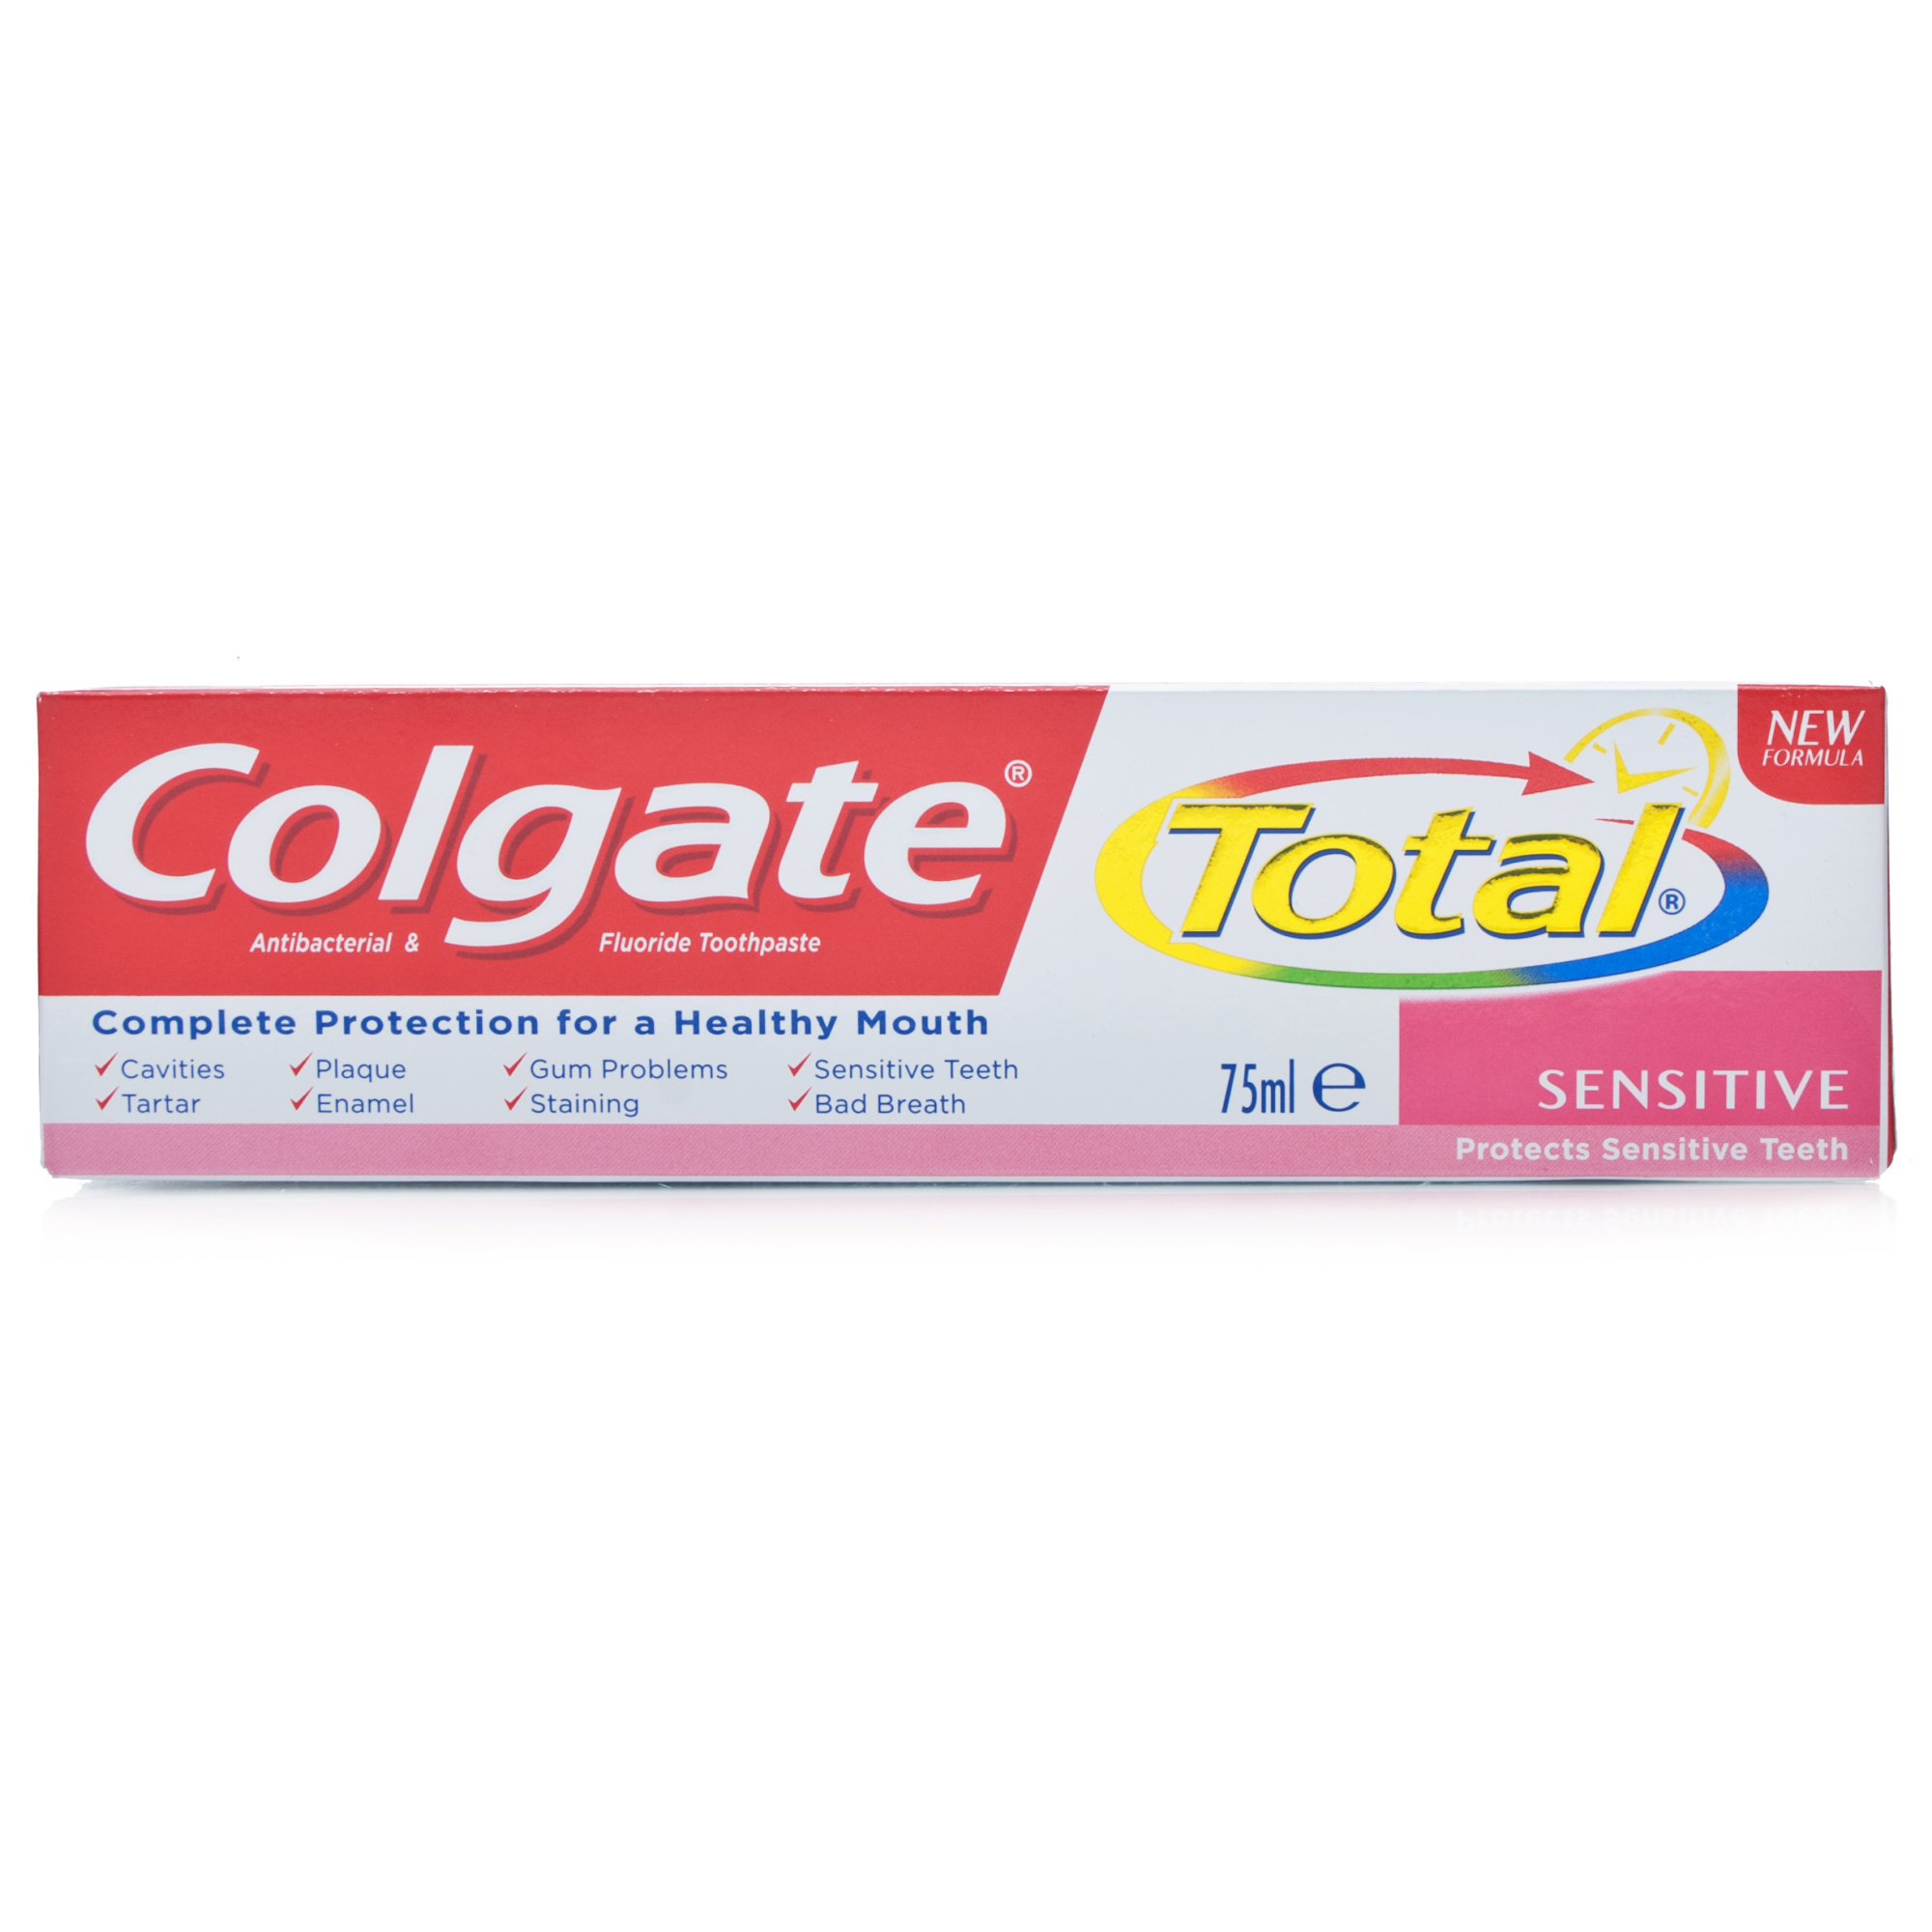 how much is a tube of colgate total care toothpaste